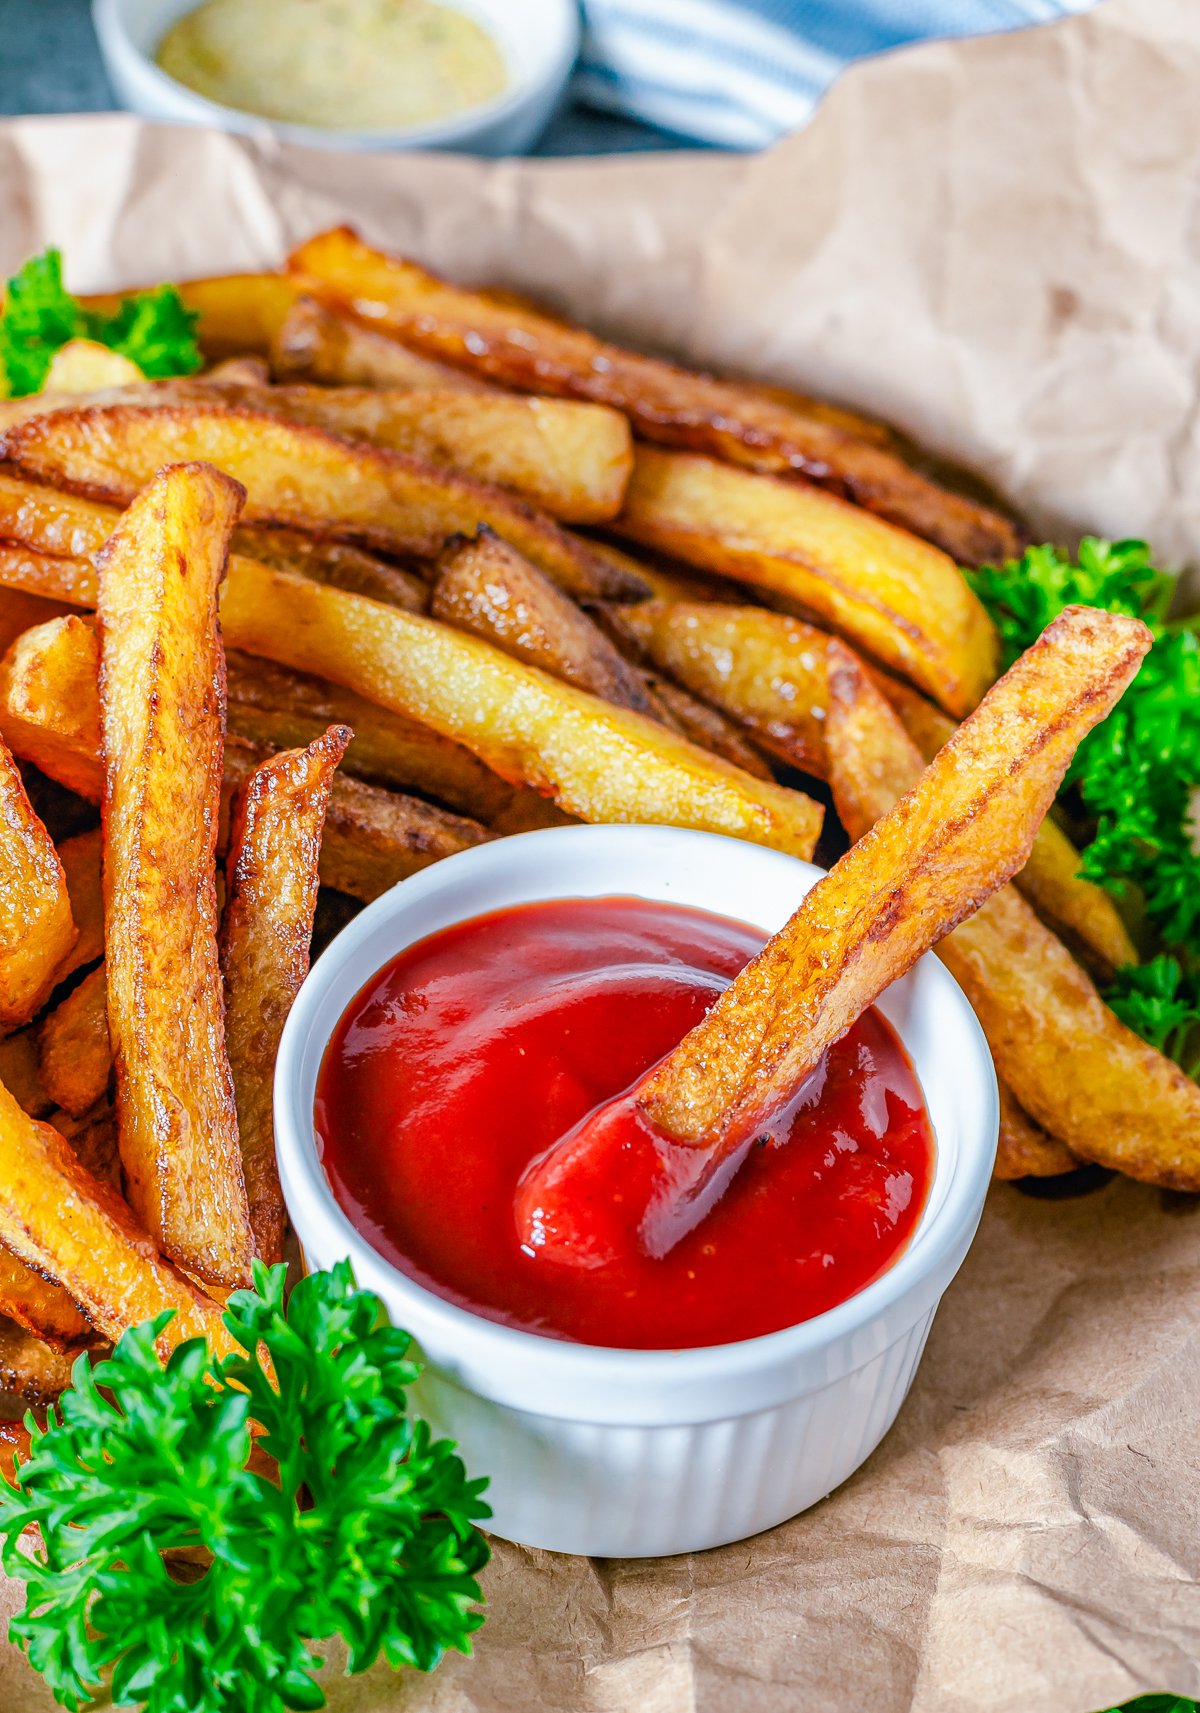 One french fry dipped in ketchup.